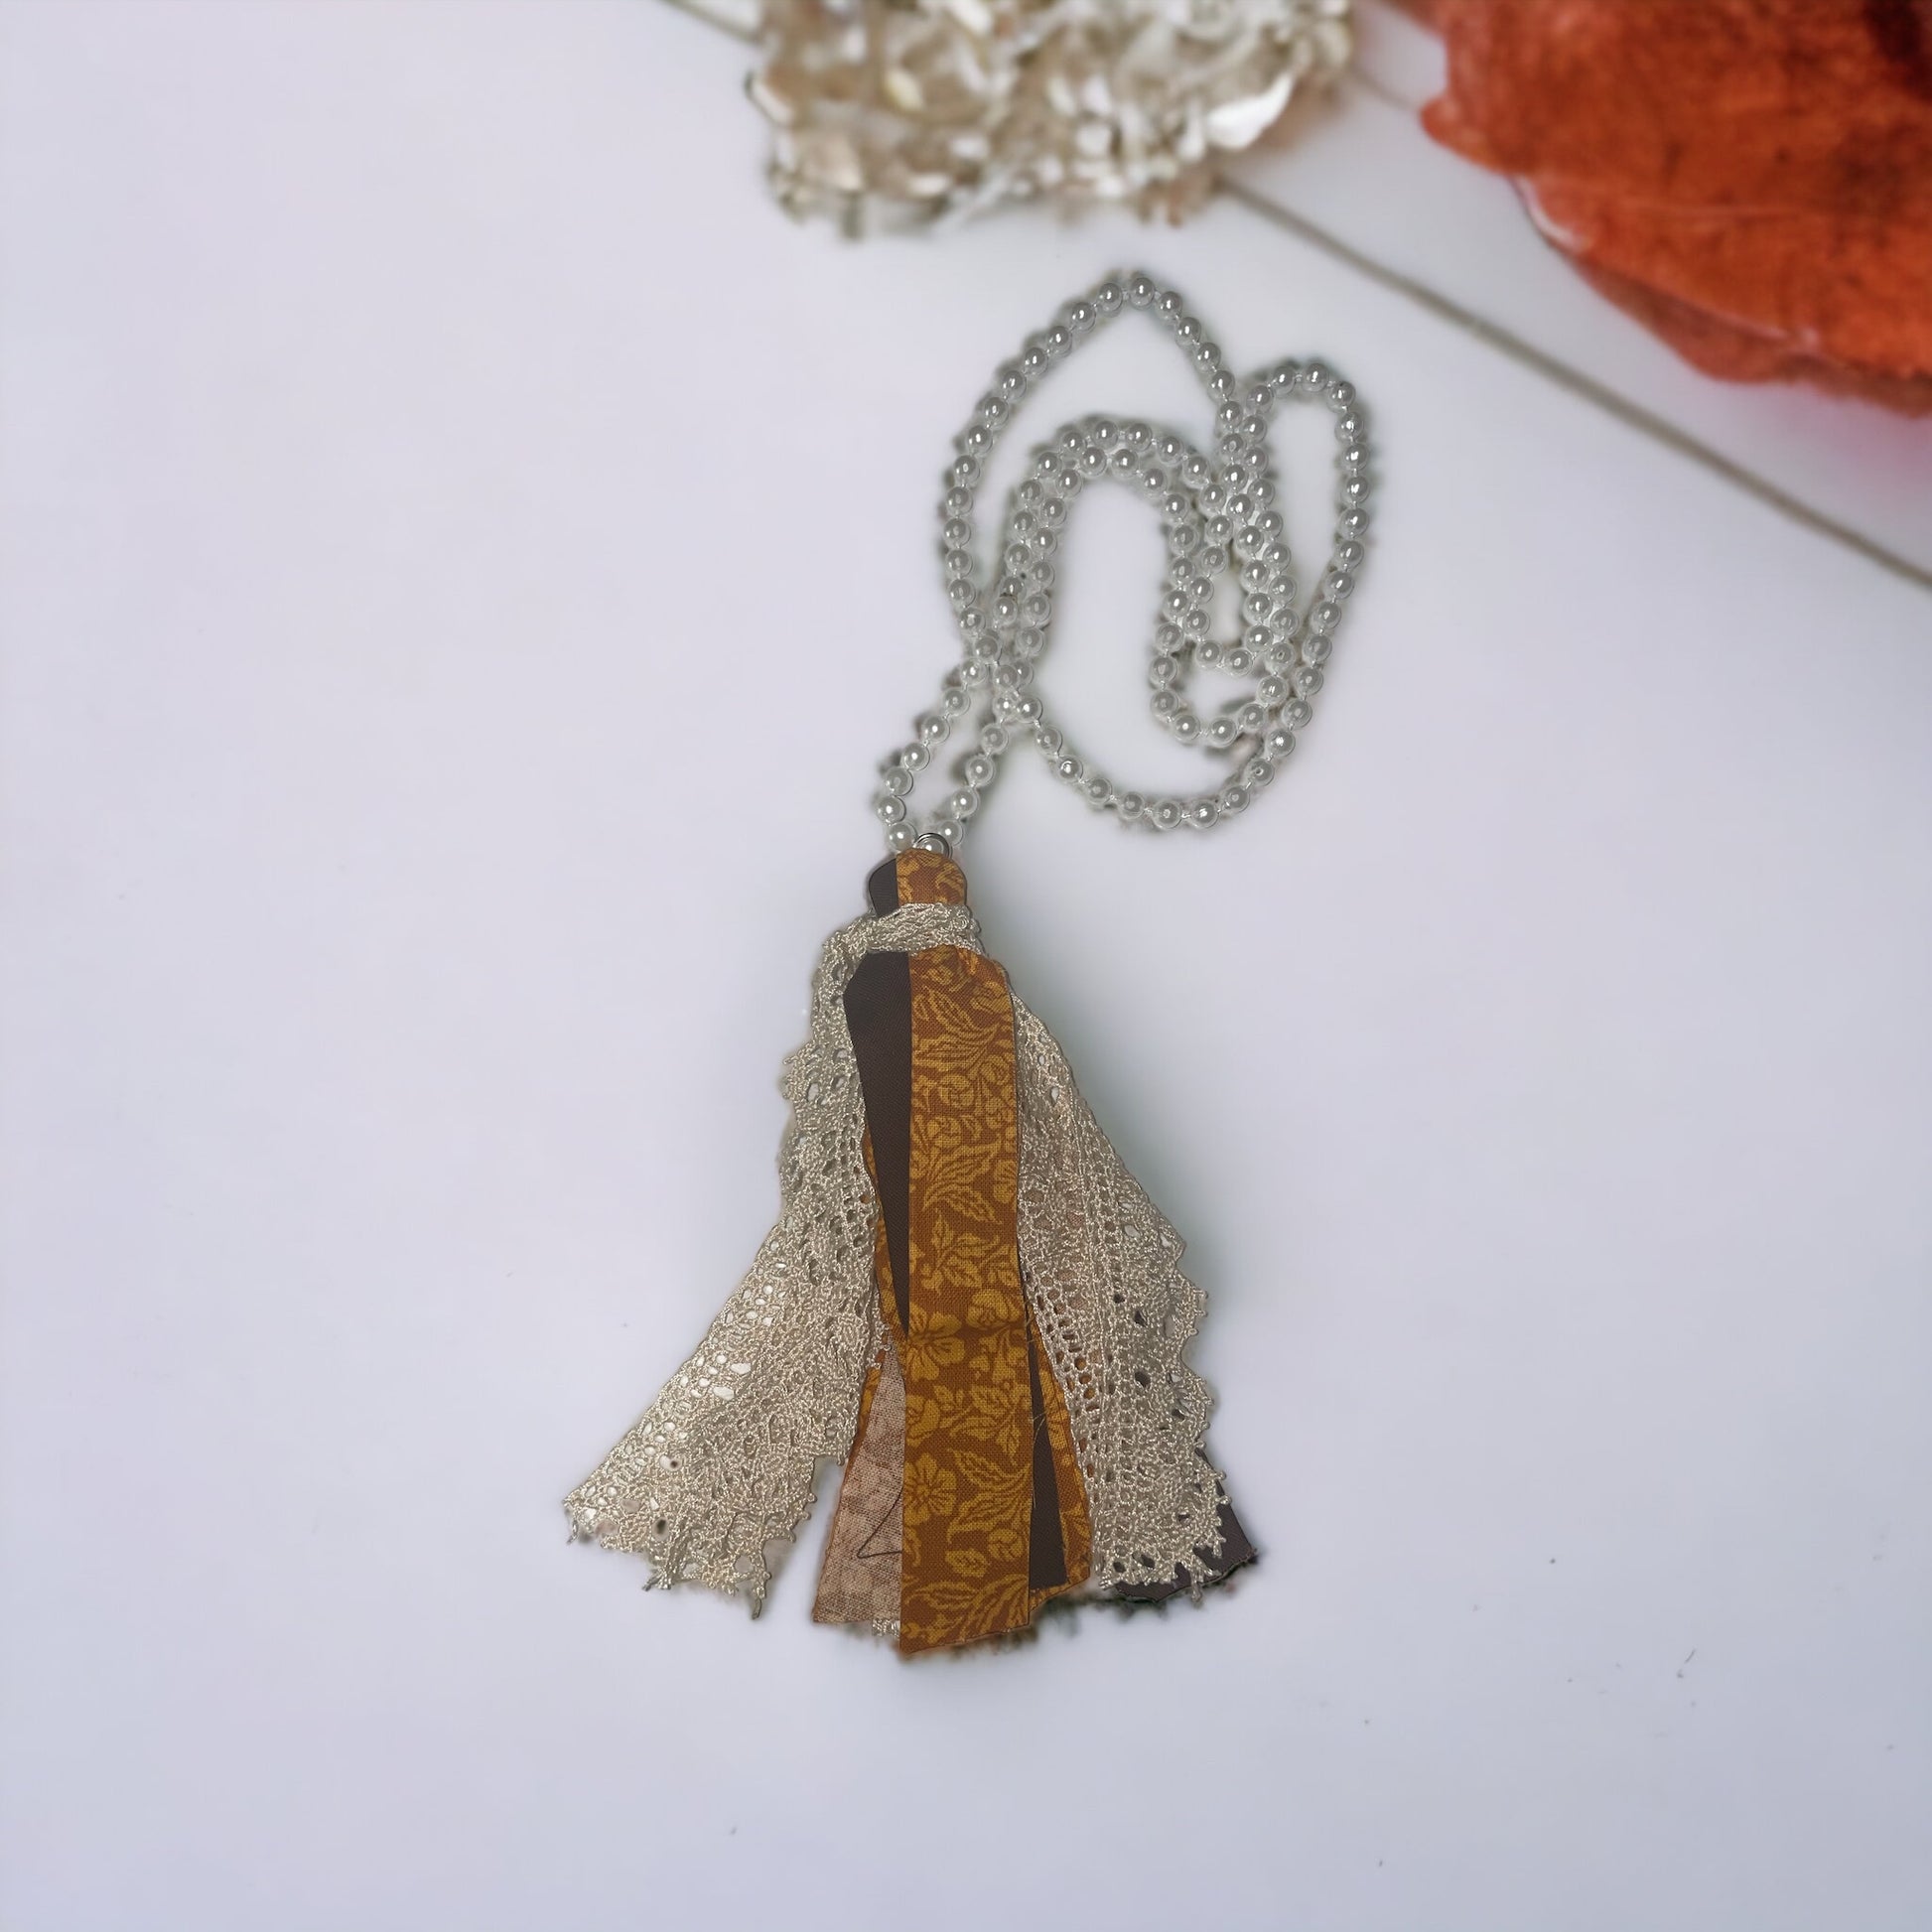 Handmade Messy Fabric Tassel Necklace in Fall Colors - Heather's Heavenly Boutique